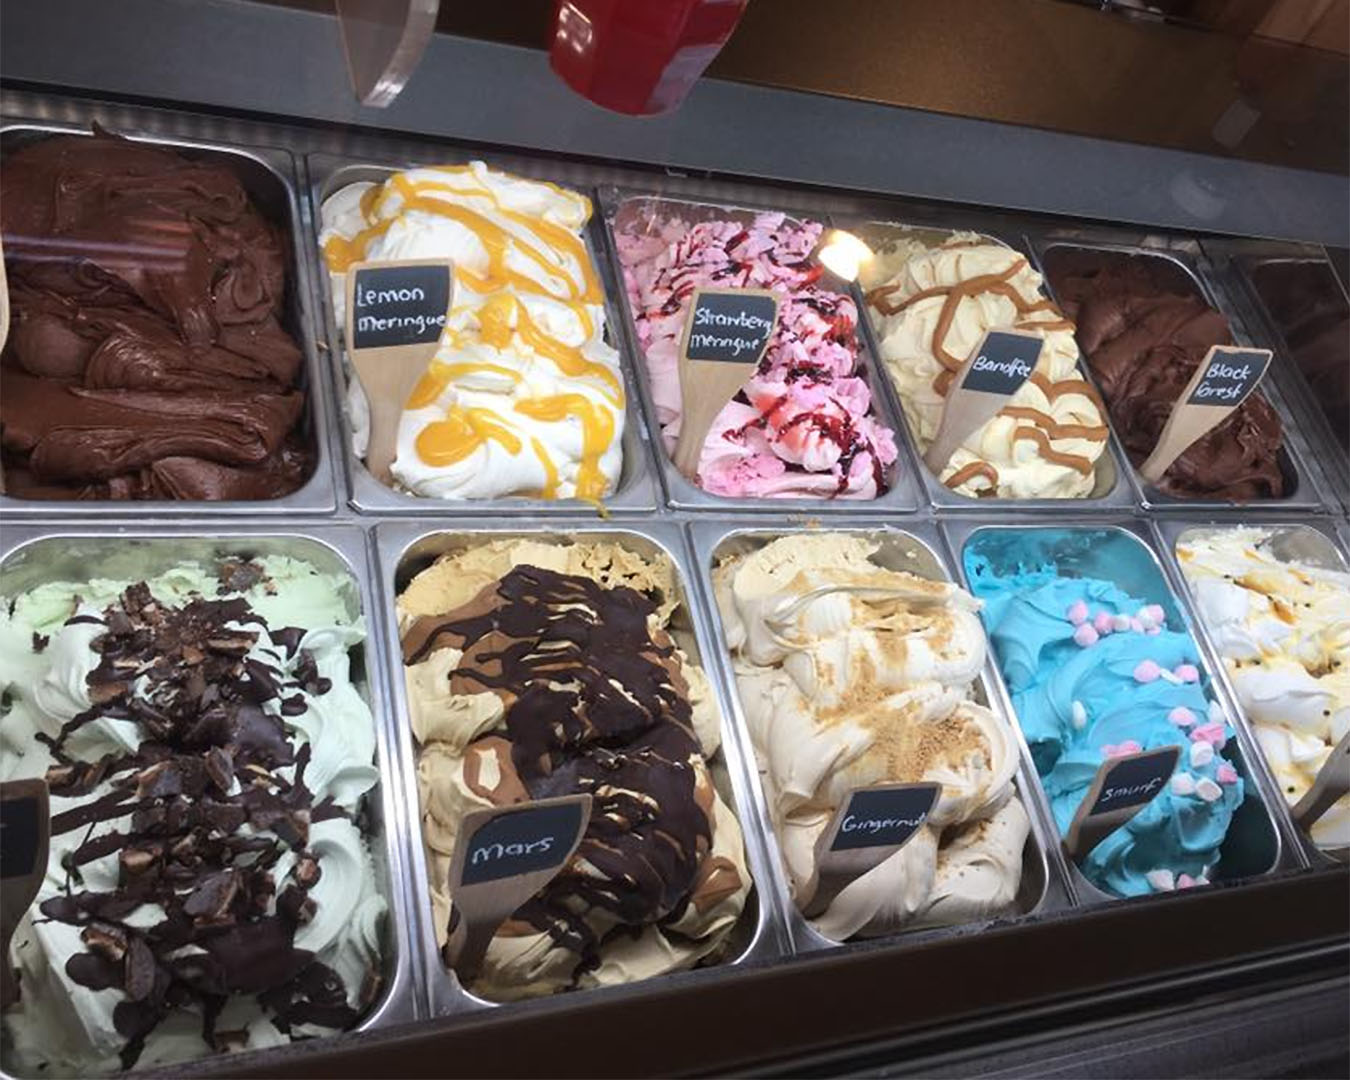 All the ice creams available at Juicy.